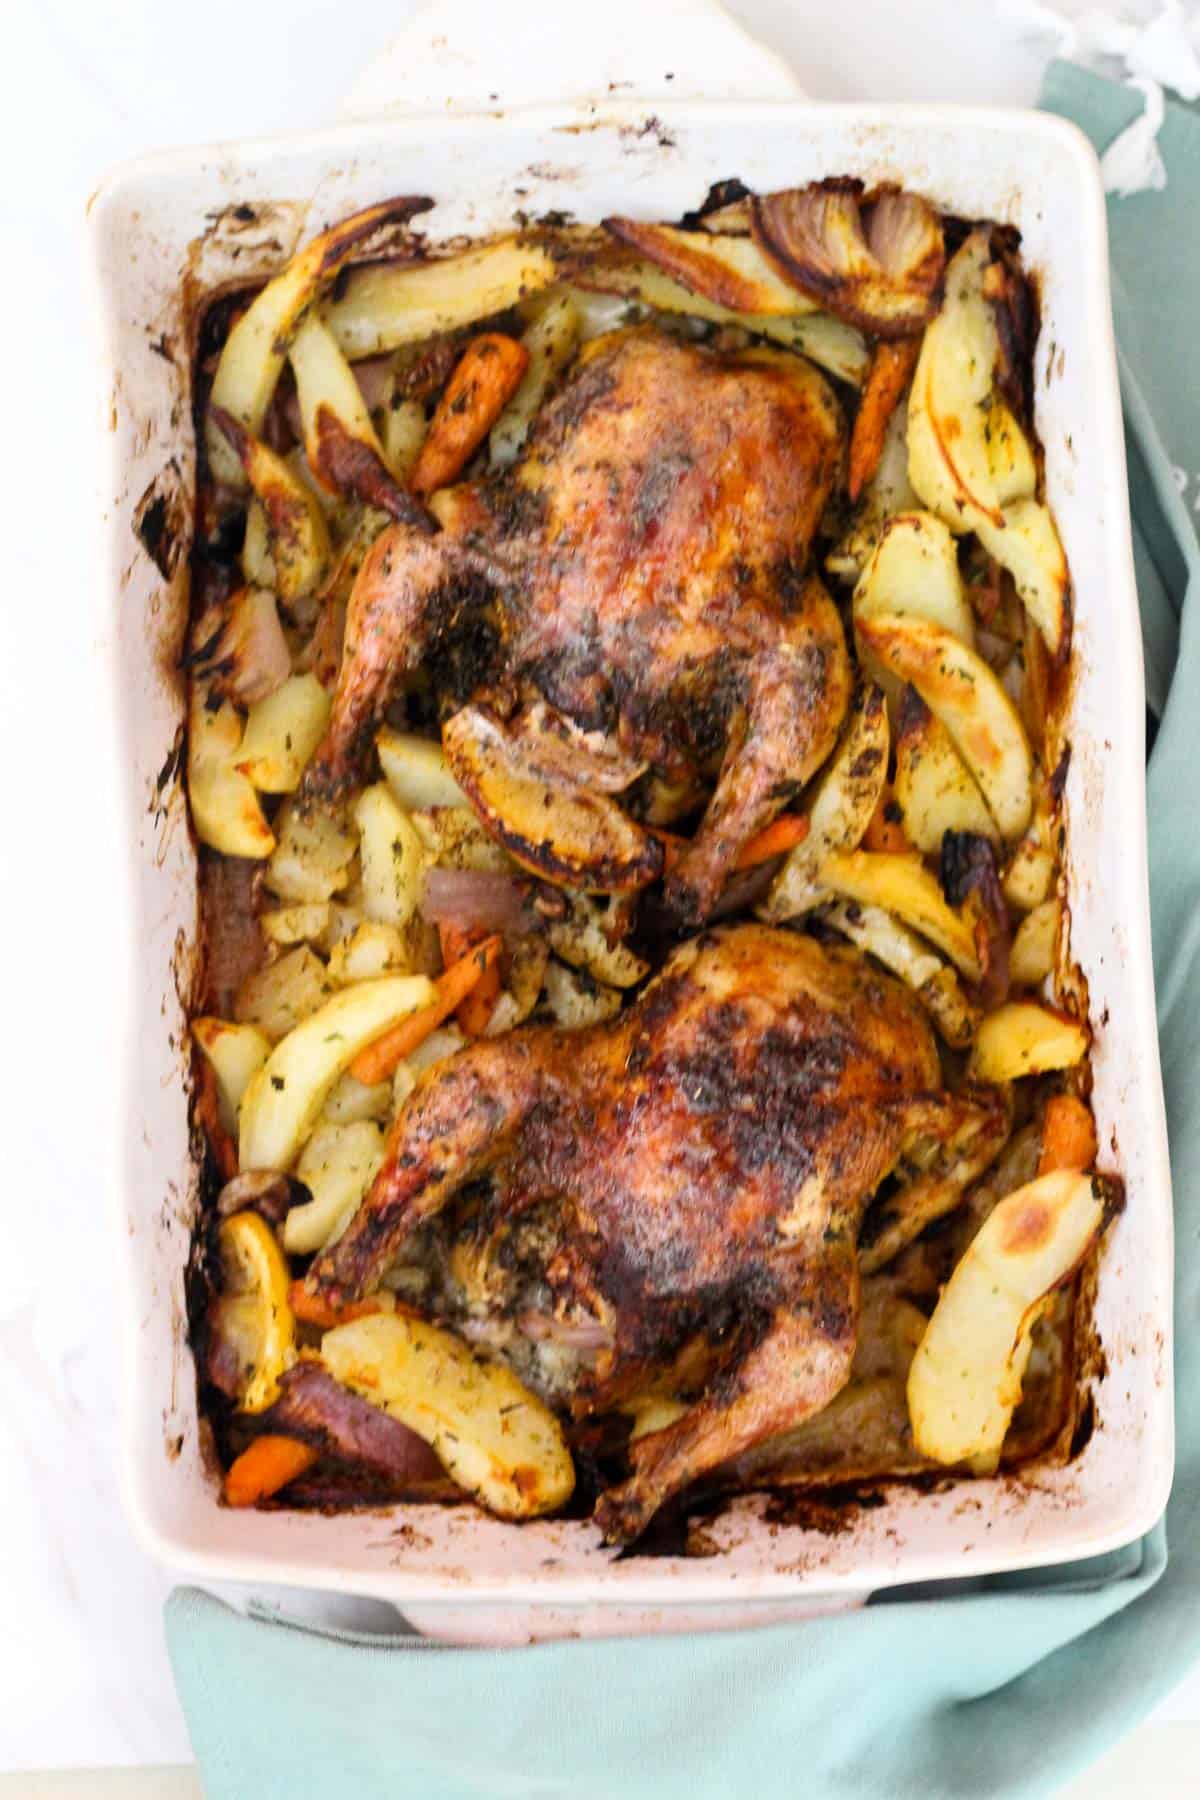 Roasted cornish hens and potatoes in a baking dish, there are 2 hens on the dish surrounded by lots of potatoes.